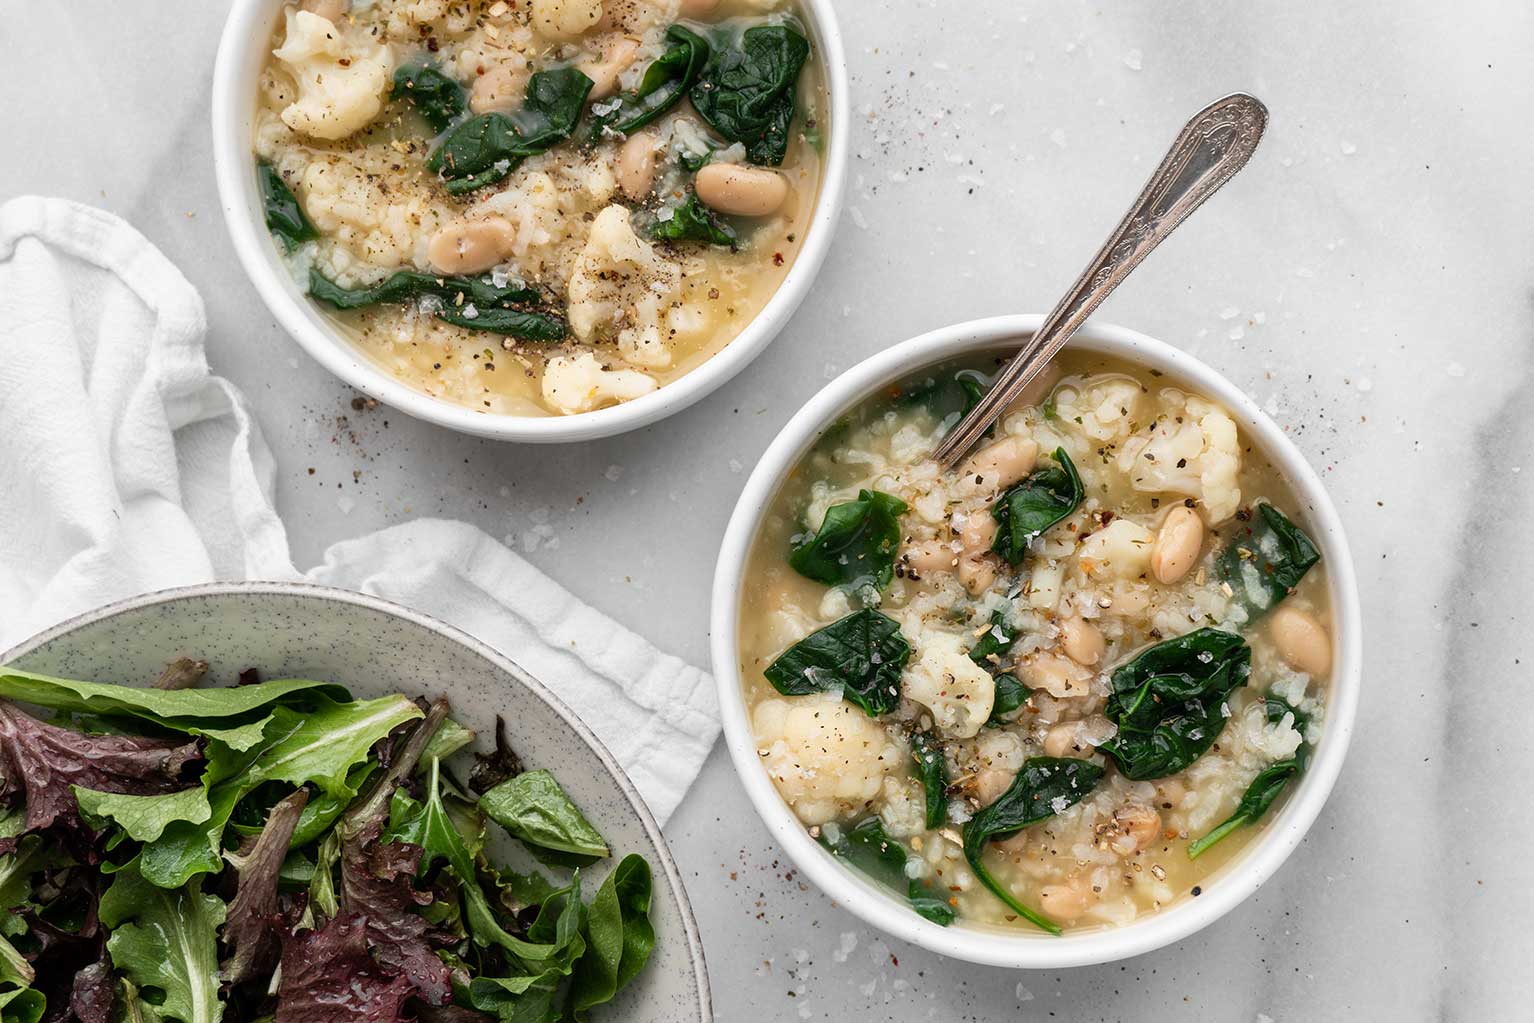 Two bowls of rice and white bean soup with spinach and side salad on counter